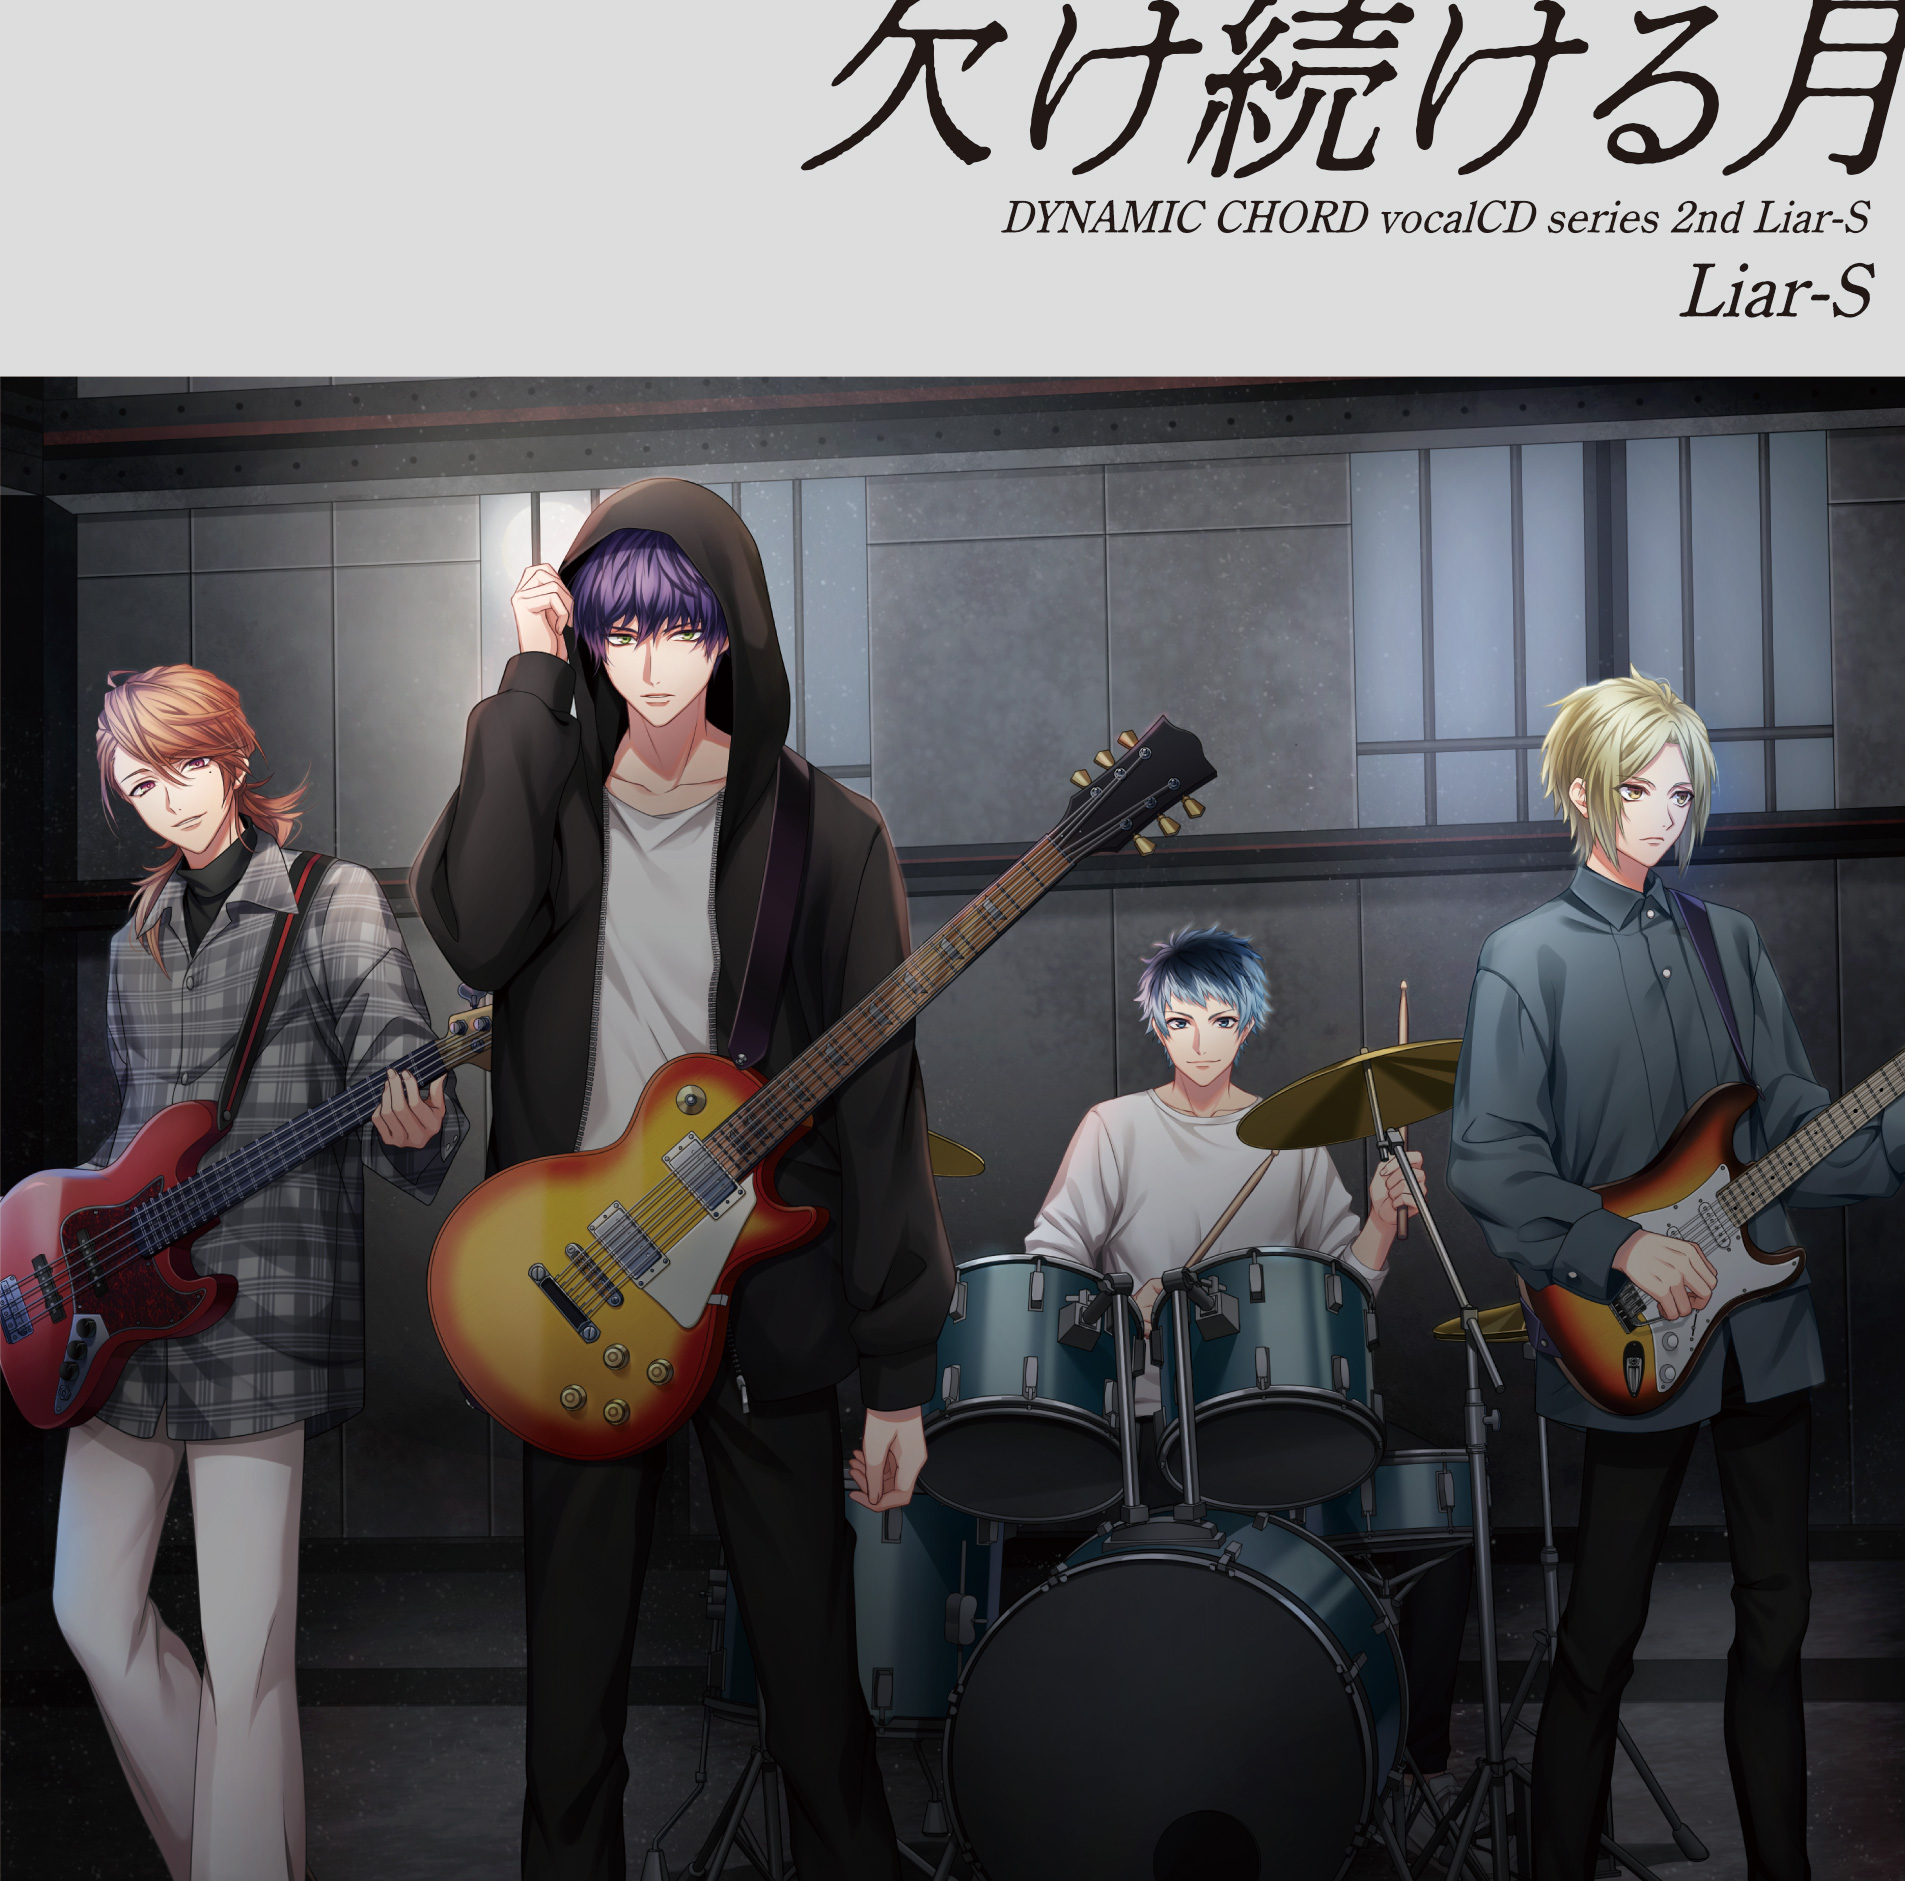 vocalCD series 2nd Liar-S